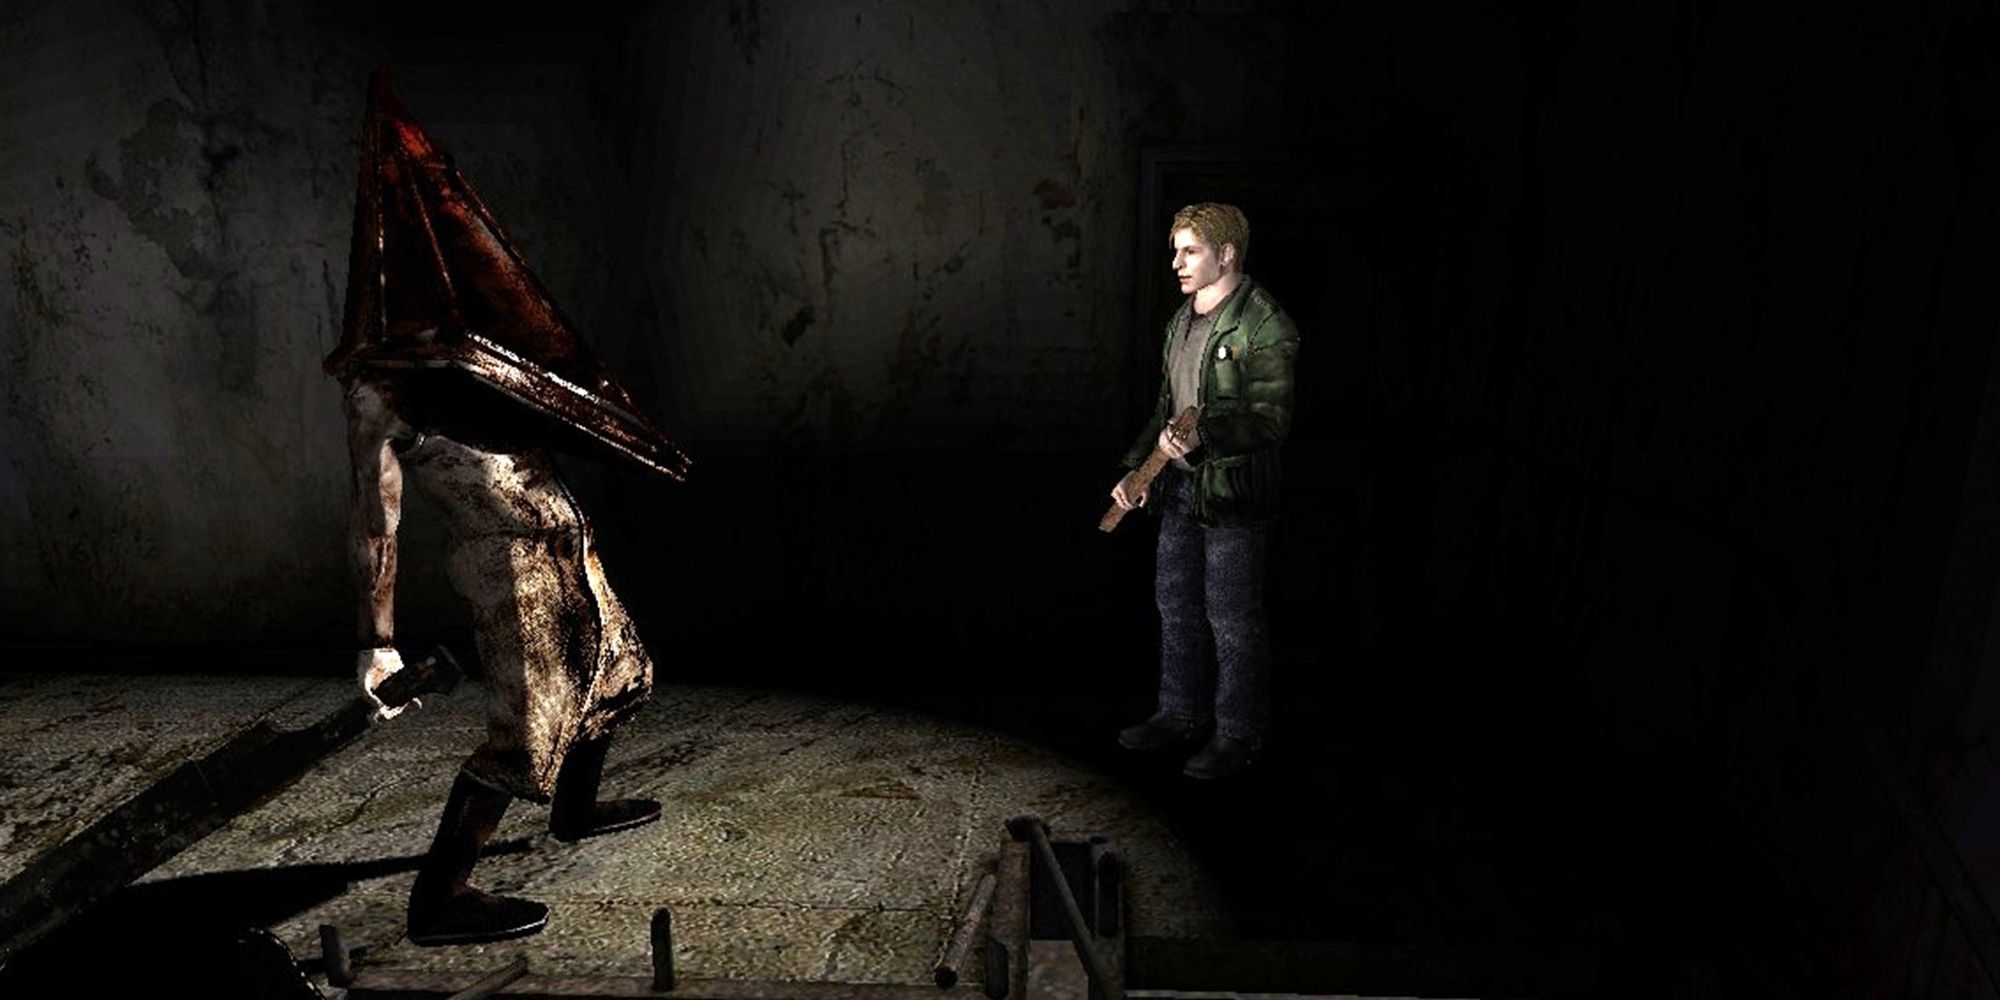 James Sunderland and Pyramid Head from Silent Hill 2